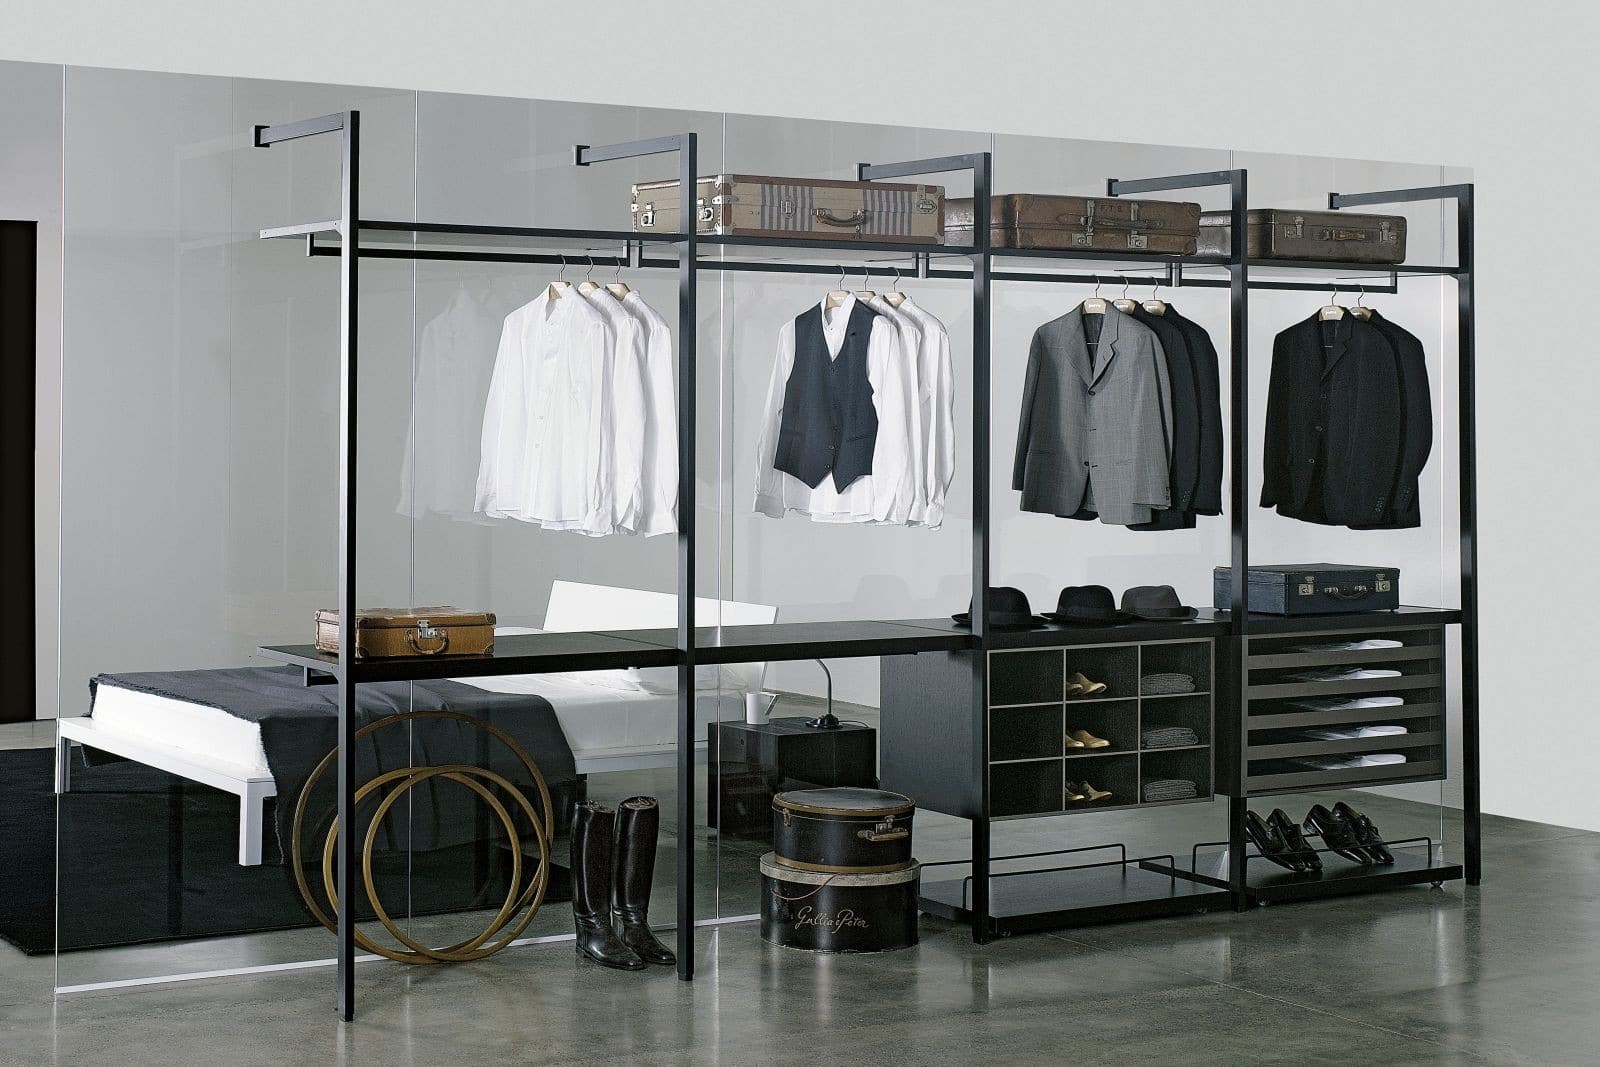 Sartorial Display: The Storage Solutions Of Porro